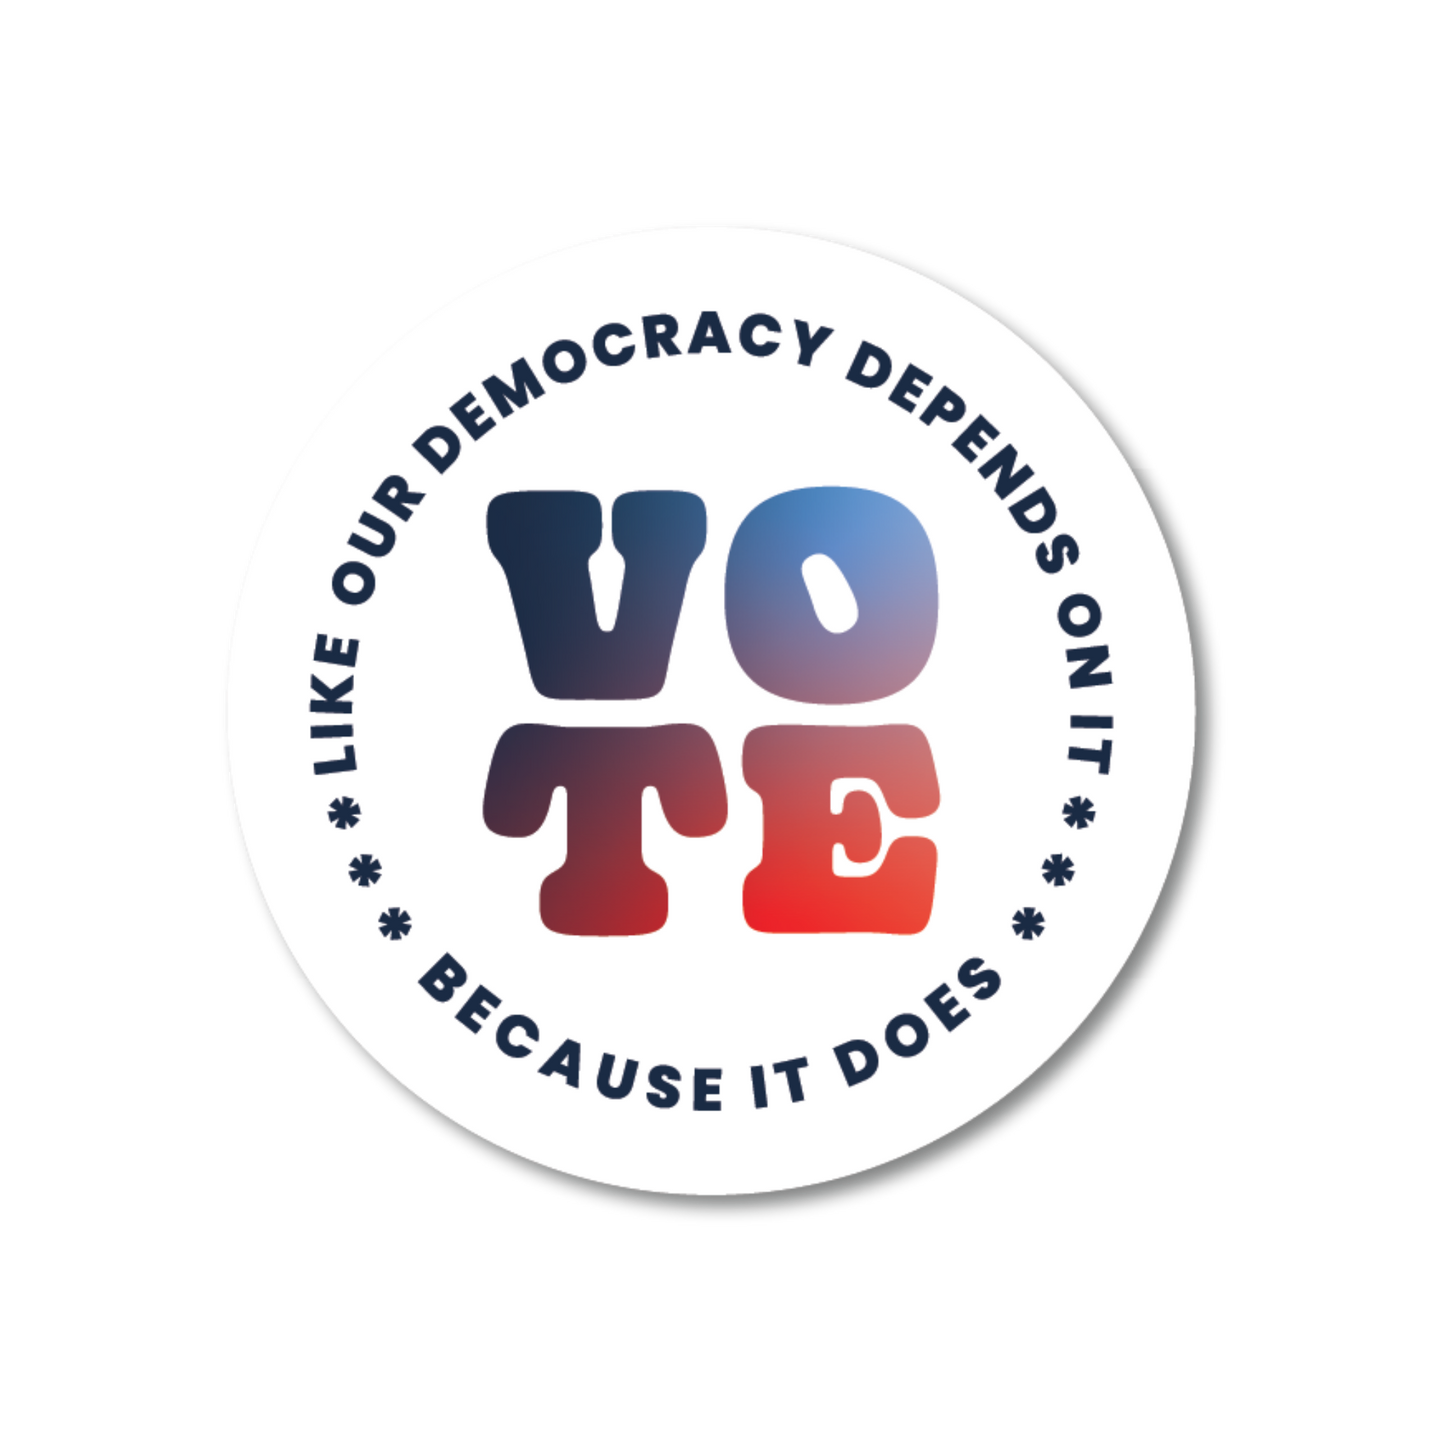 Vote Like Our Democracy Depends On It Sticker